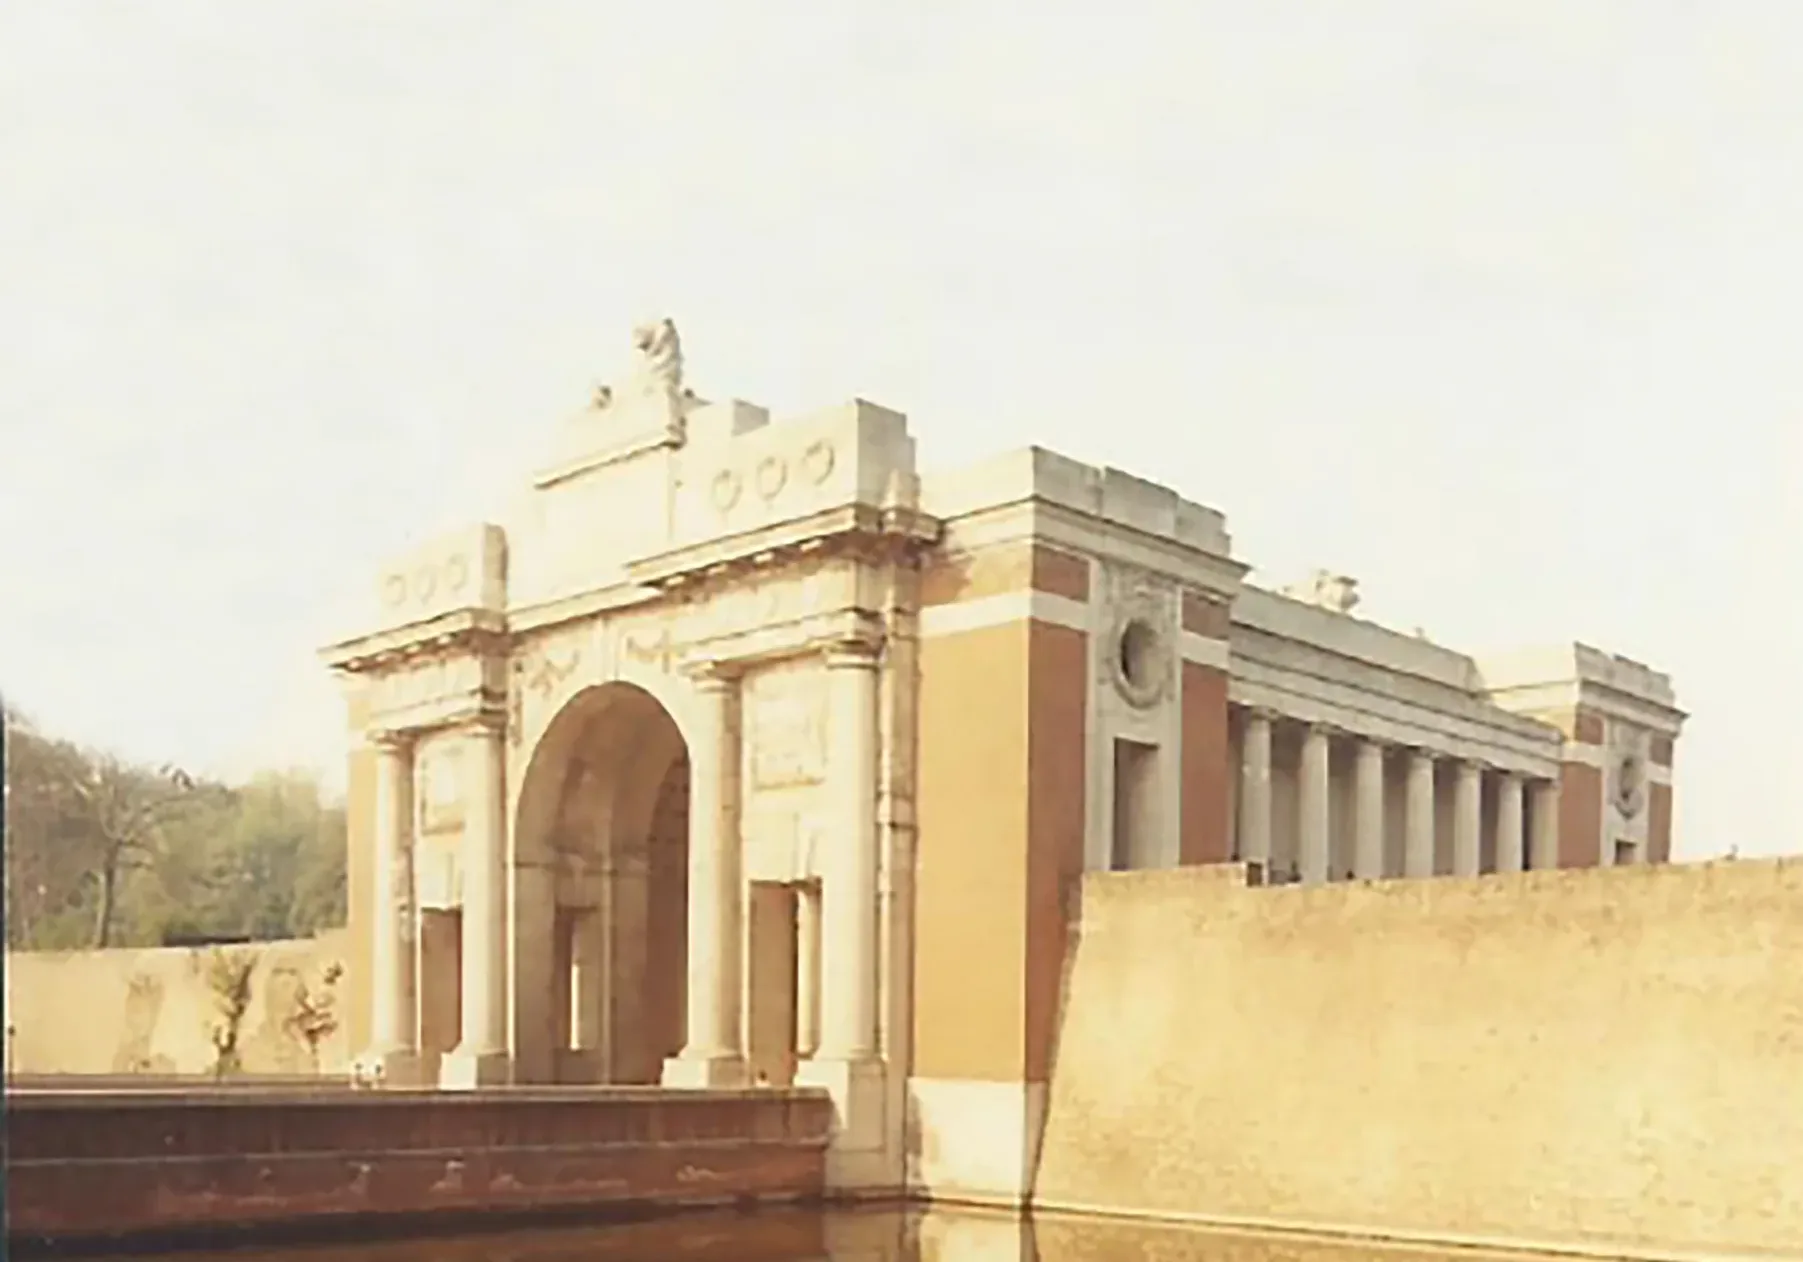 The Name on the Menin Gate